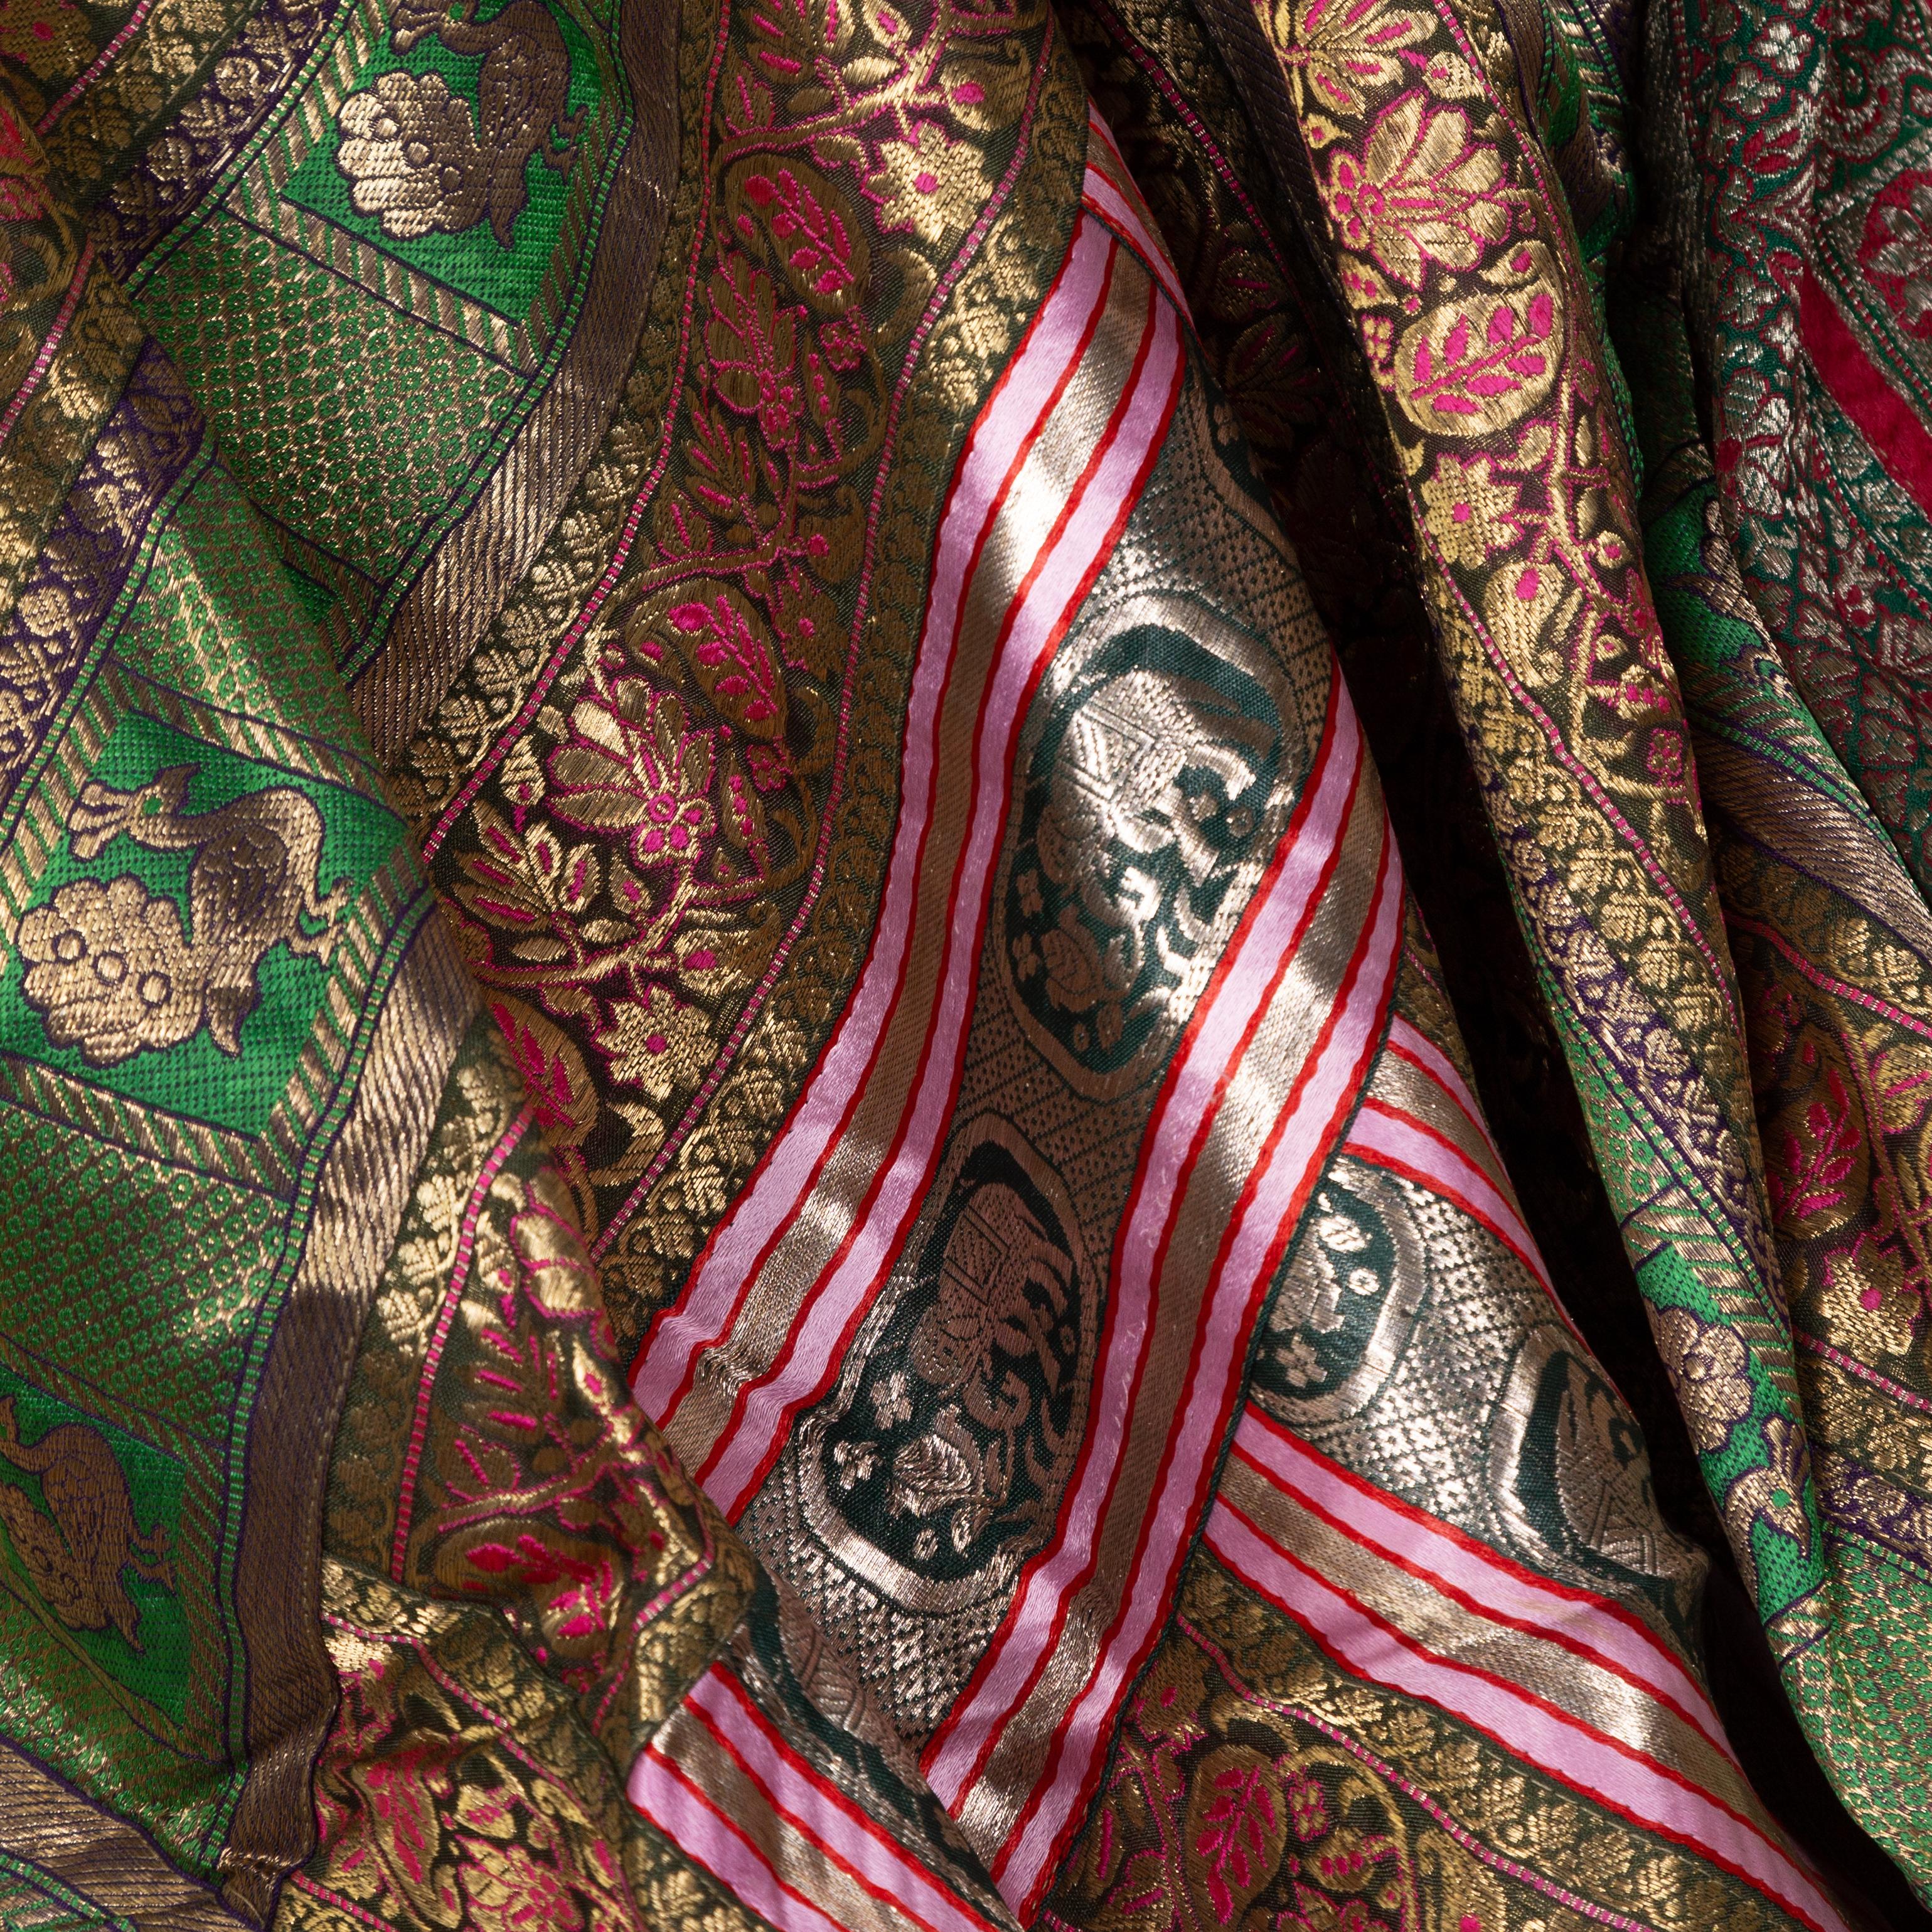 An Indian vintage large silk embroidered fabric from the second half of the 20th century with elephants, peacocks, green, red, pink, silver, fuchsia and golden tones among others. Possibly originating from Rajasthan, this stunning silk fabric is